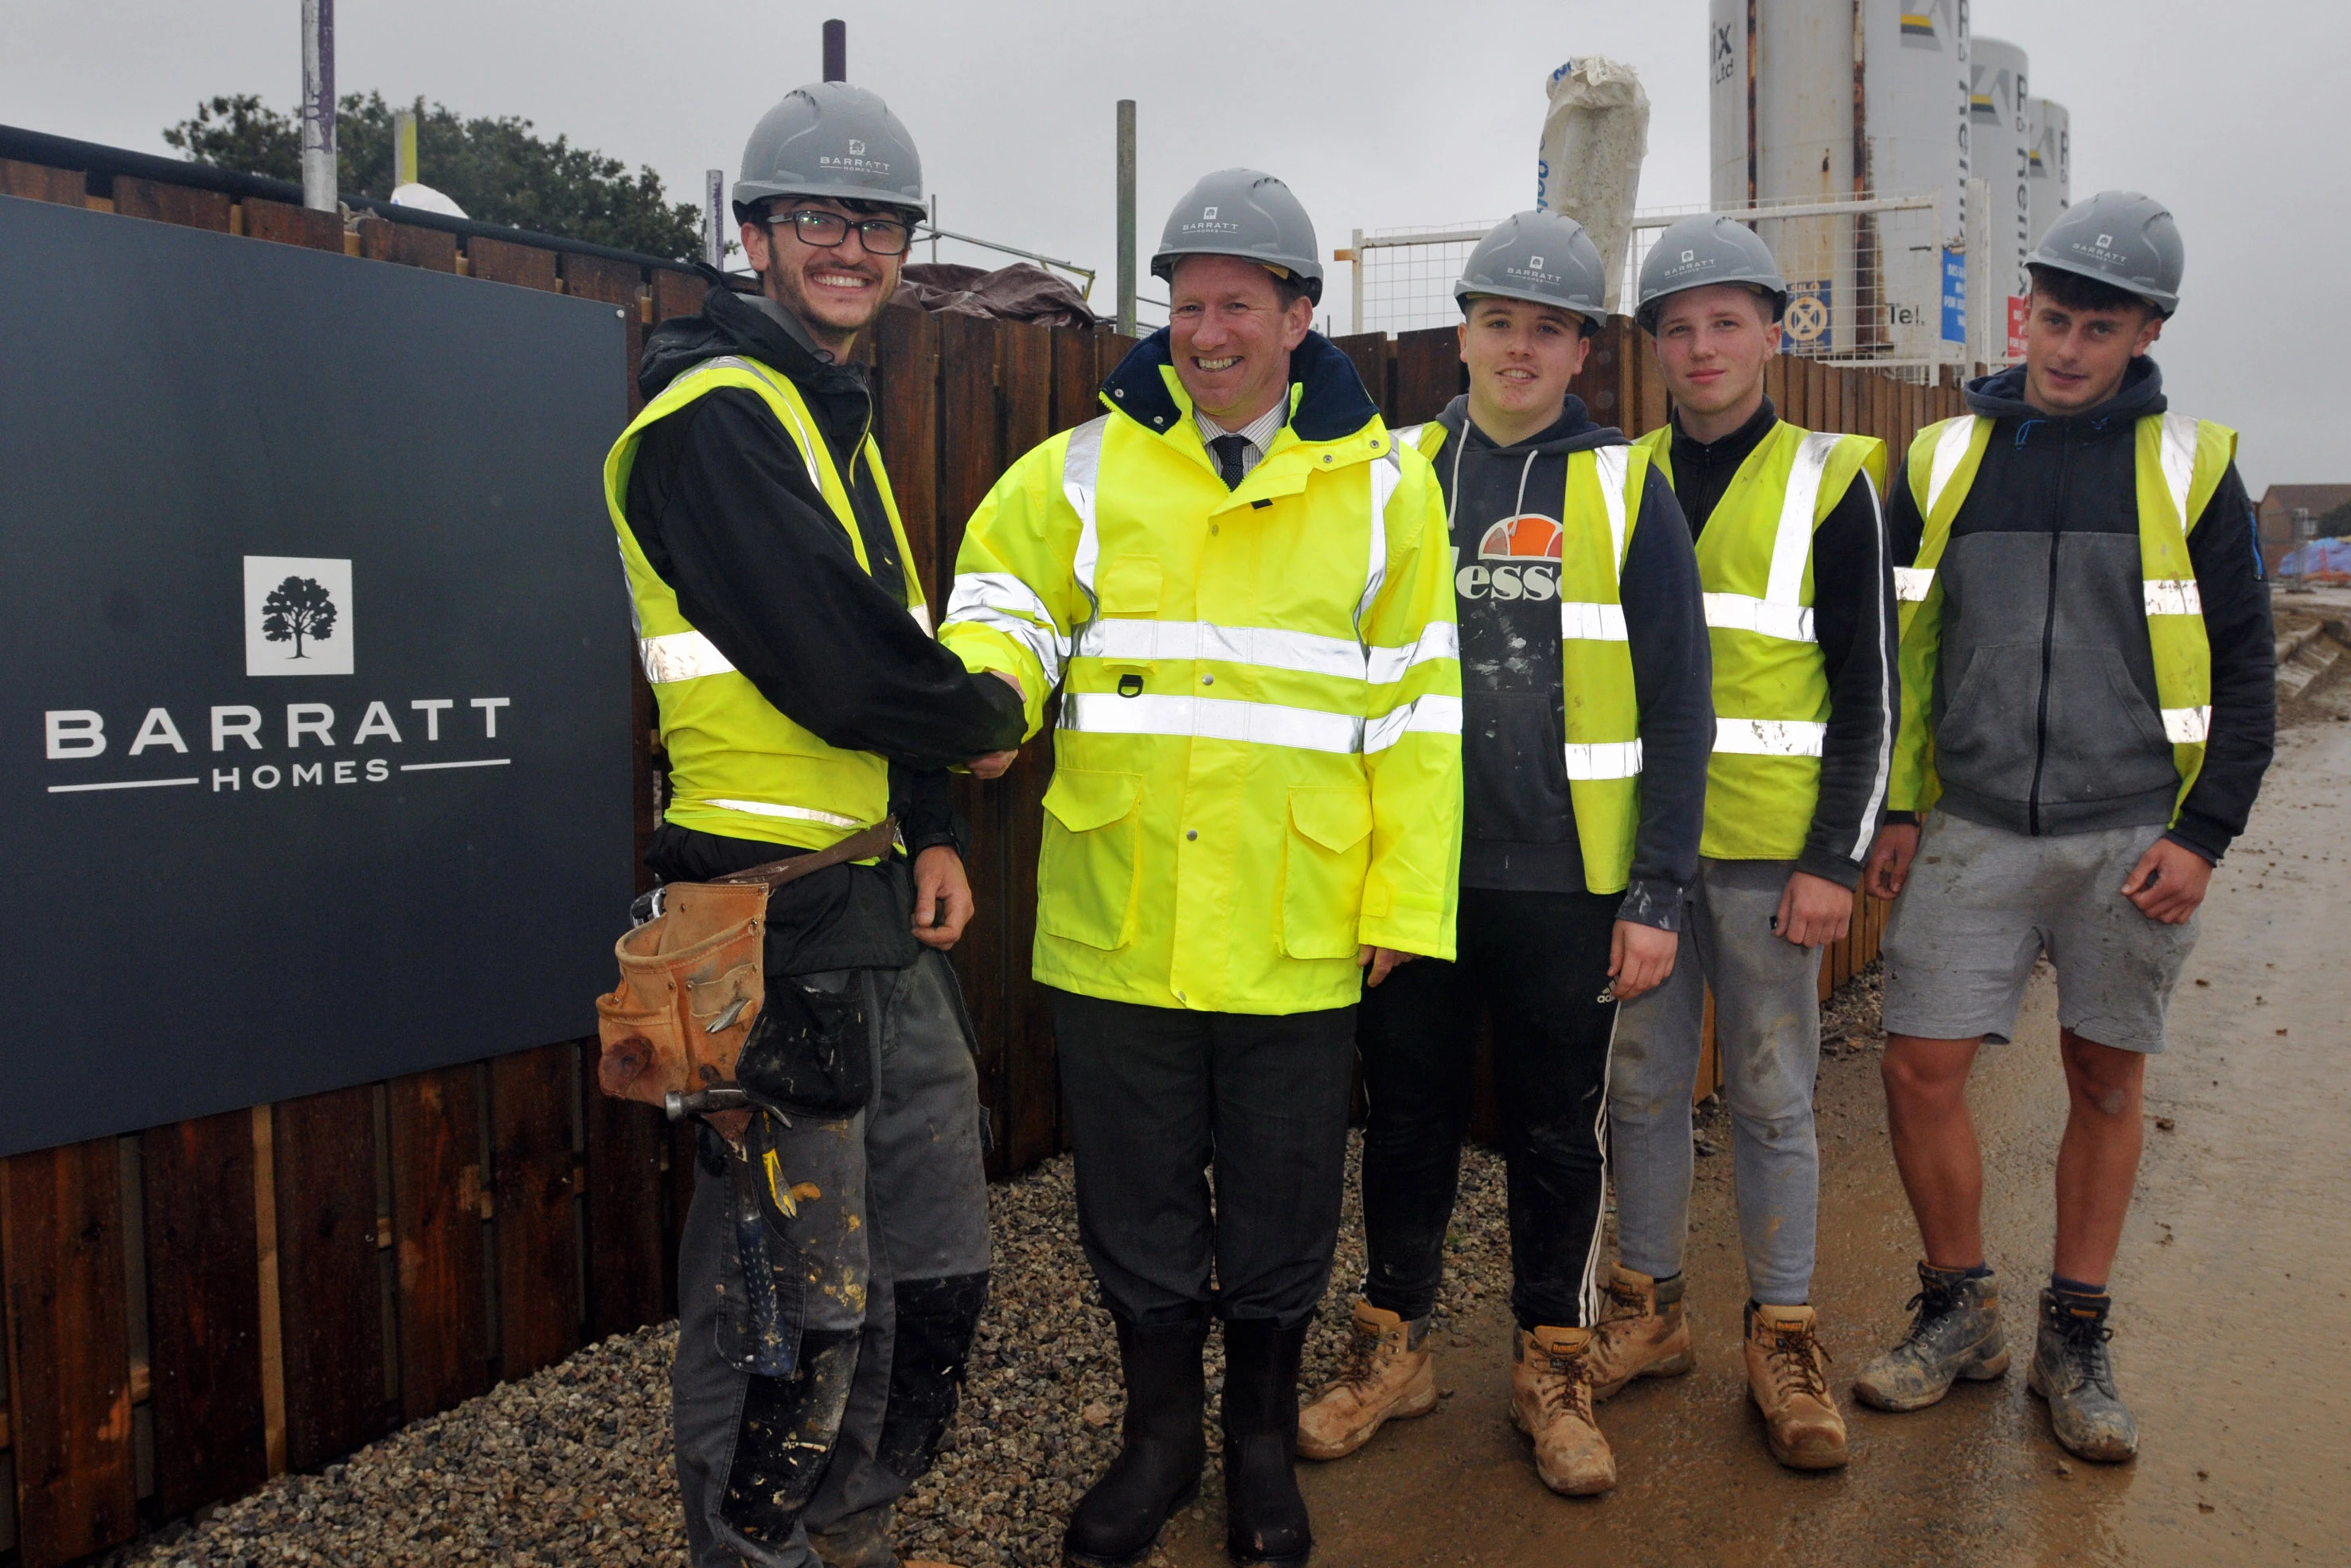 Barratt Developments chief executive David Thomas met apprentices working in Plymouth and is pictured with apprentice Jordan Brown, new recruits Louis Bradshaw and Alex Cooper and apprentice Liam Hunn.